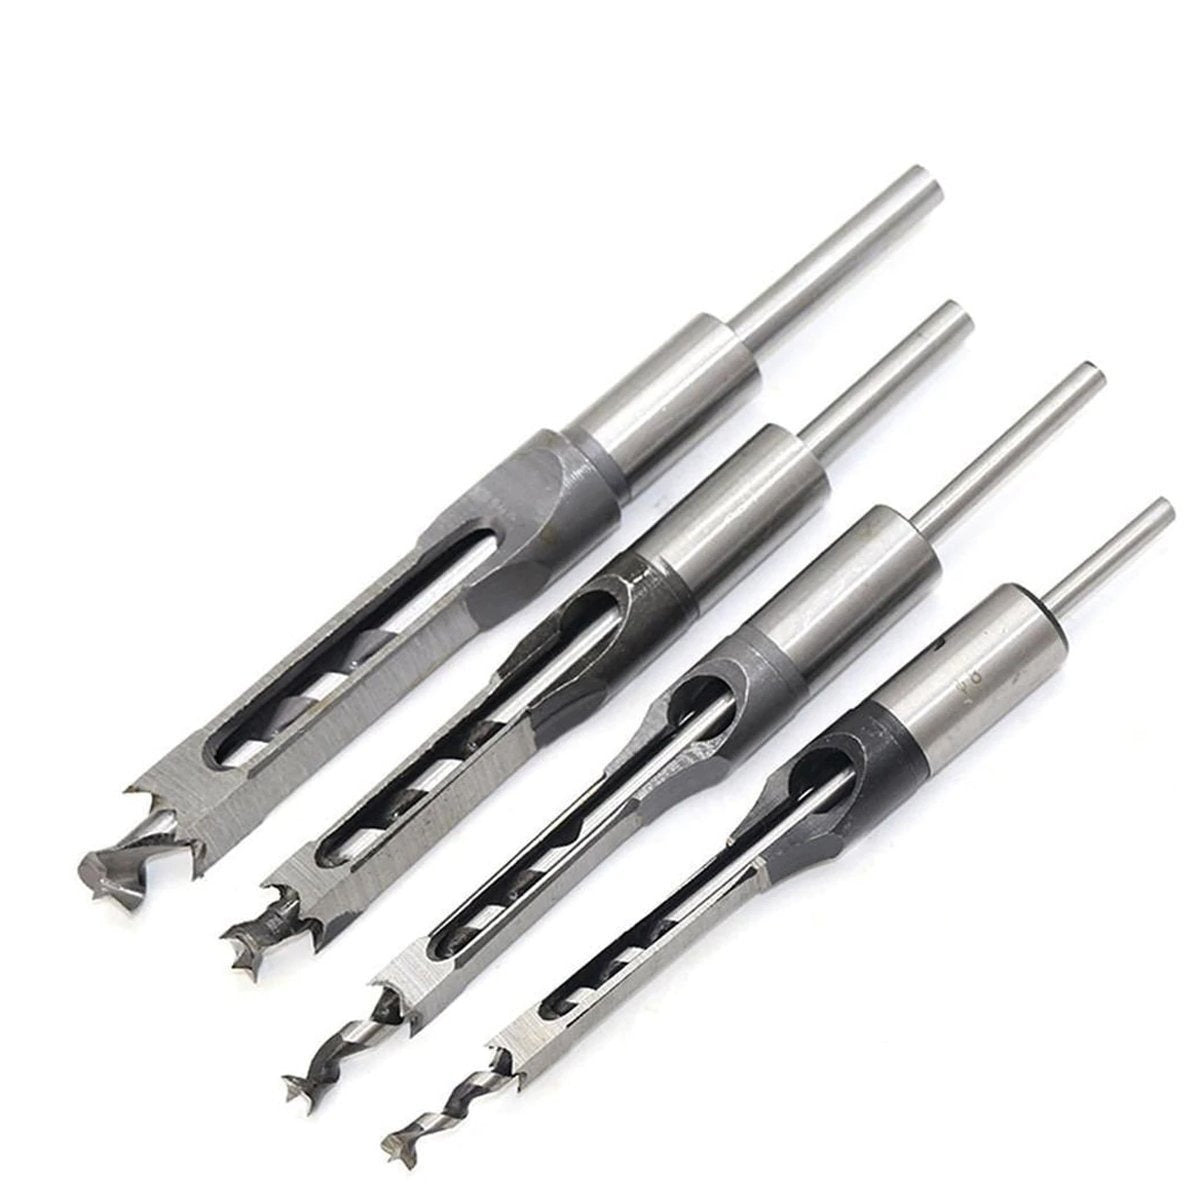 4pcs Set Square Hole Extended Drill HSS Twist Drill Bits Woodworking Drill Tools Kit Set Square Auger Mortising Chisel Drill Set